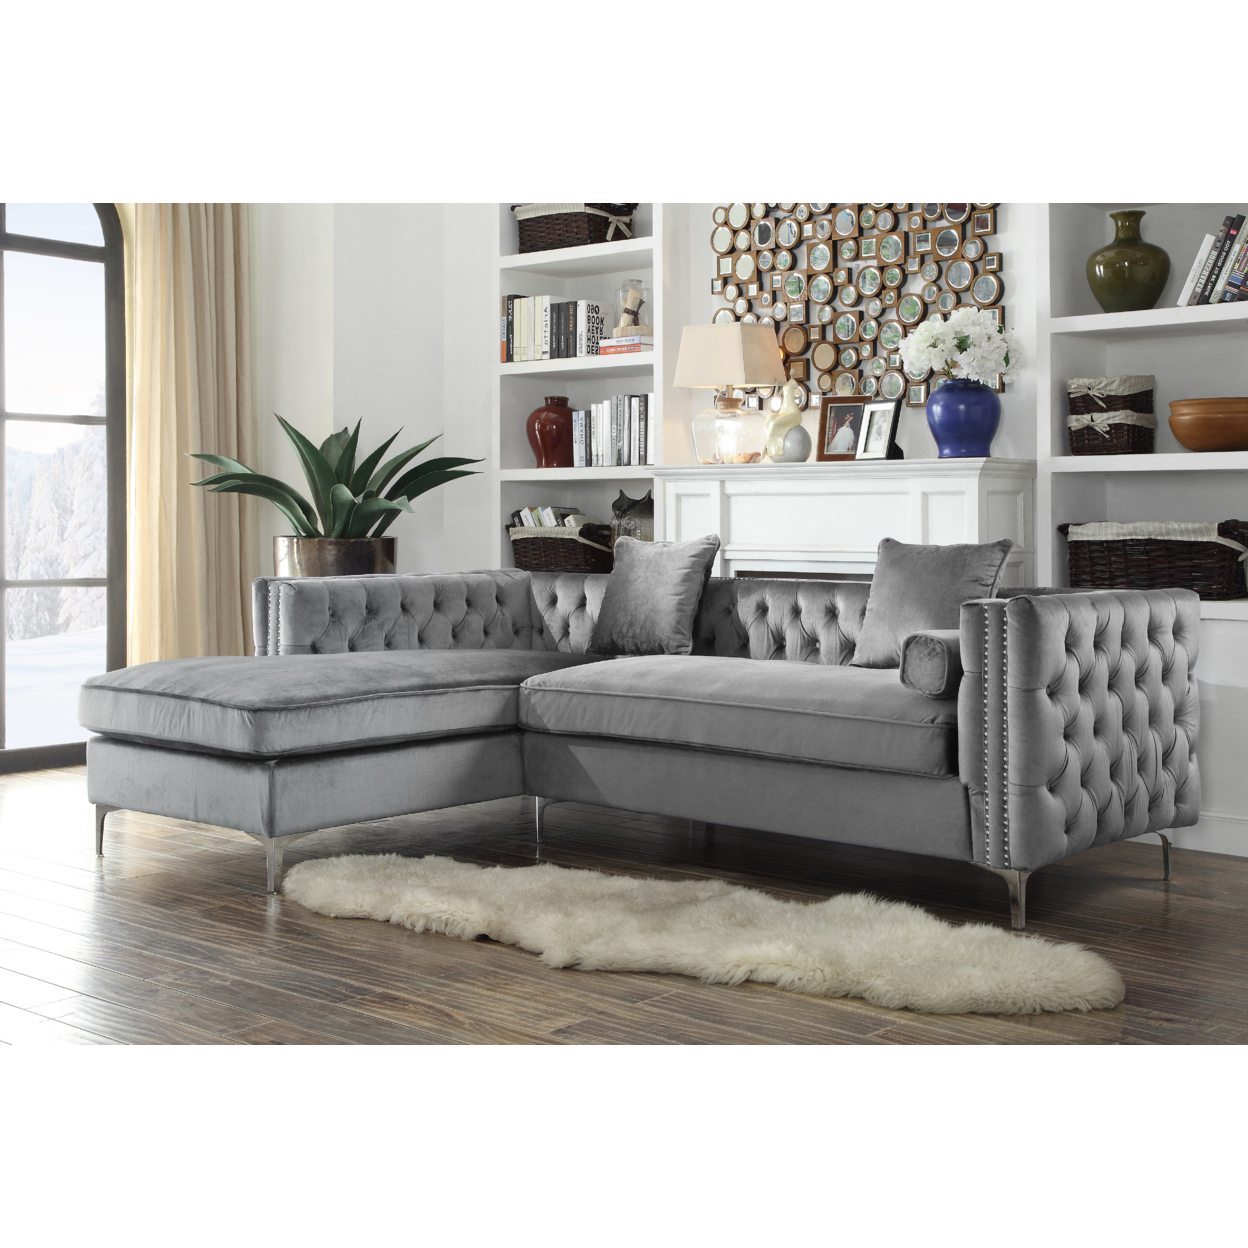 Picasso Velvet Left Facing Sectional Sofa Button Tufted With Silver Nailhead Trim Silvertone Metal Y-leg - Grey